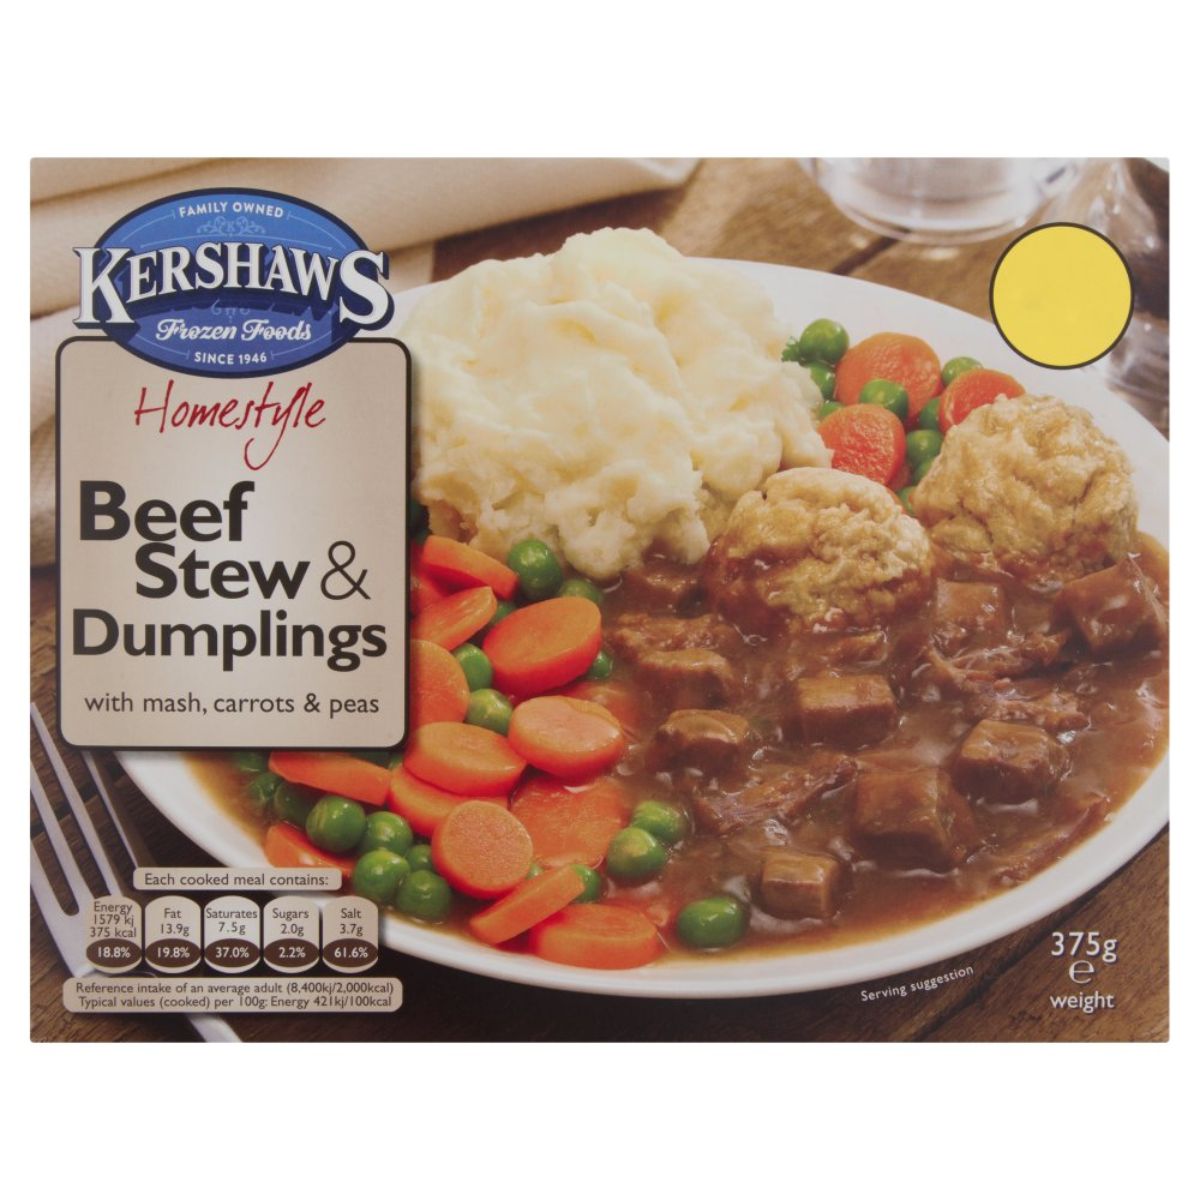 A box of Kershaws - Homestyle Beef Stew & Dumplings with Mash, Carrots & Peas - 375g.